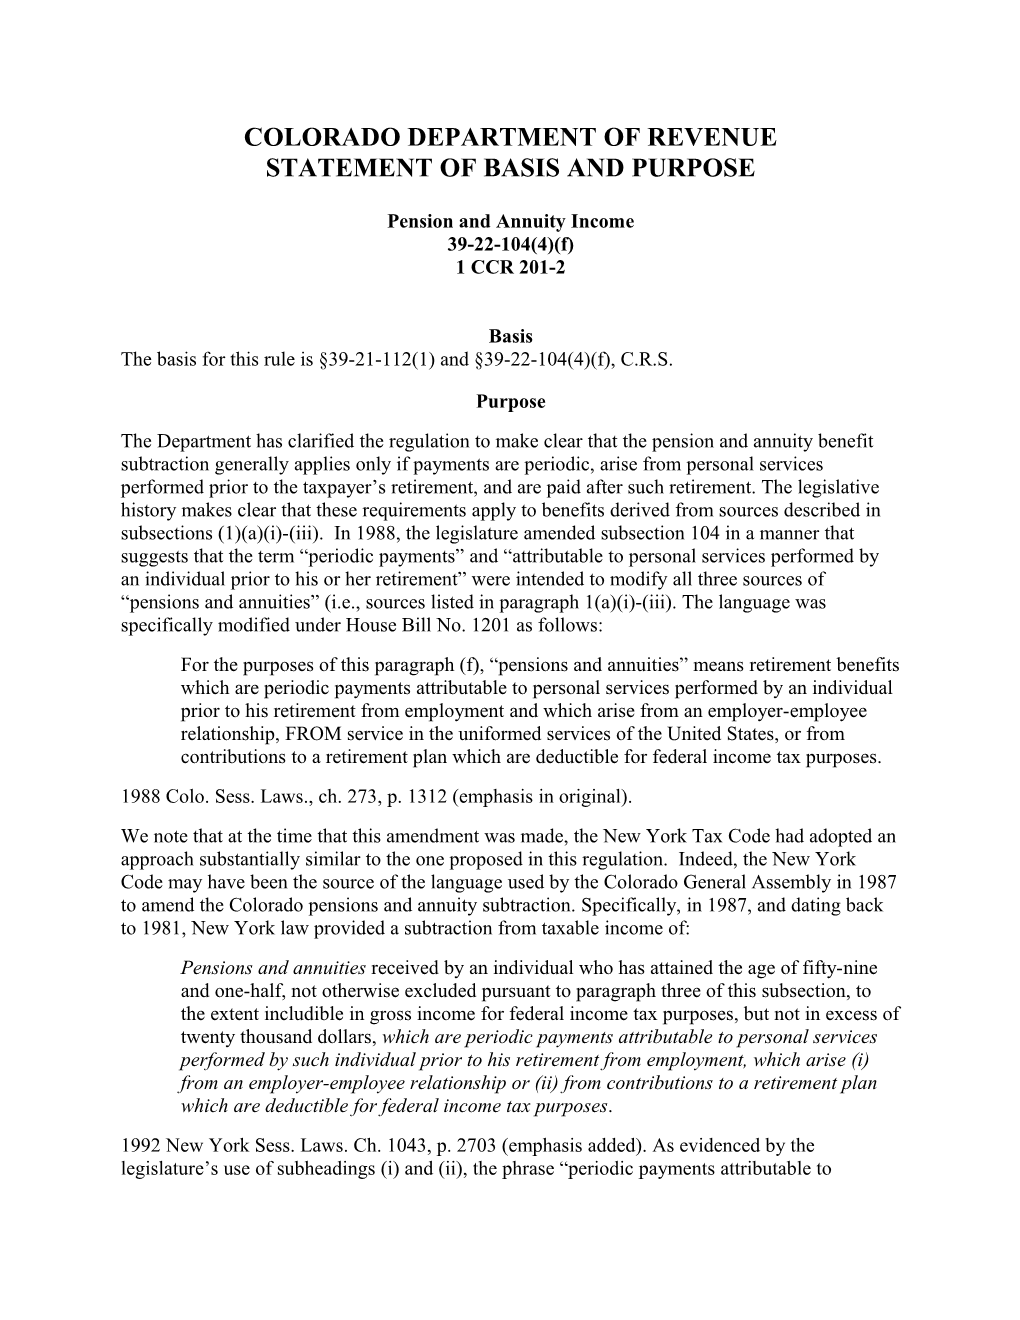 Statement of Basis and Purpose